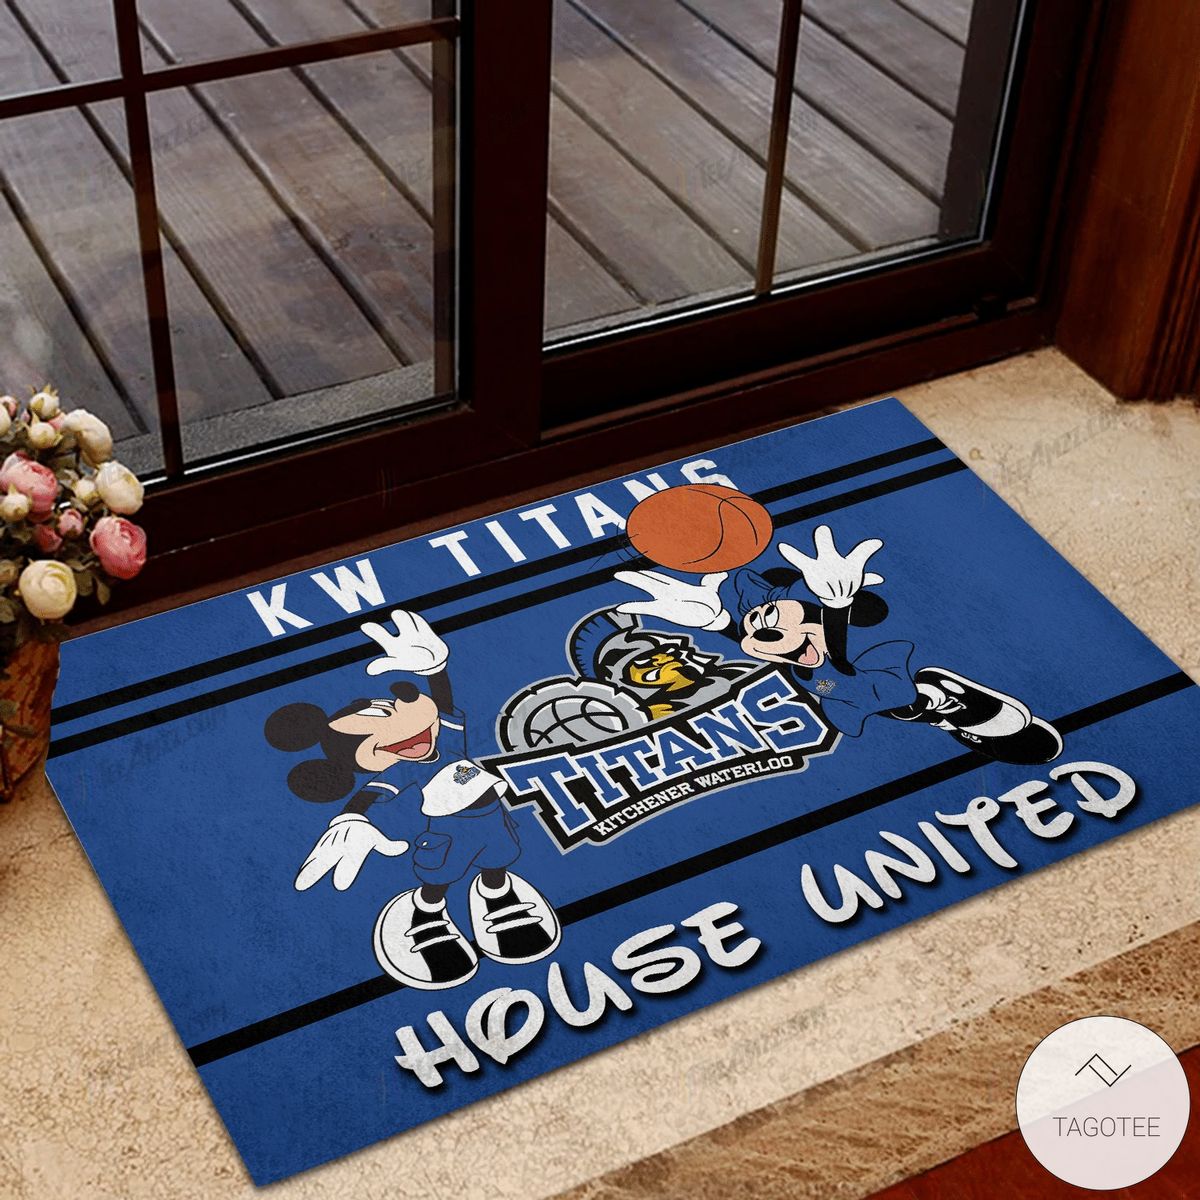 KW Titans Kitchener Waterloo House United Mickey Mouse And Minnie Mouse Doormat